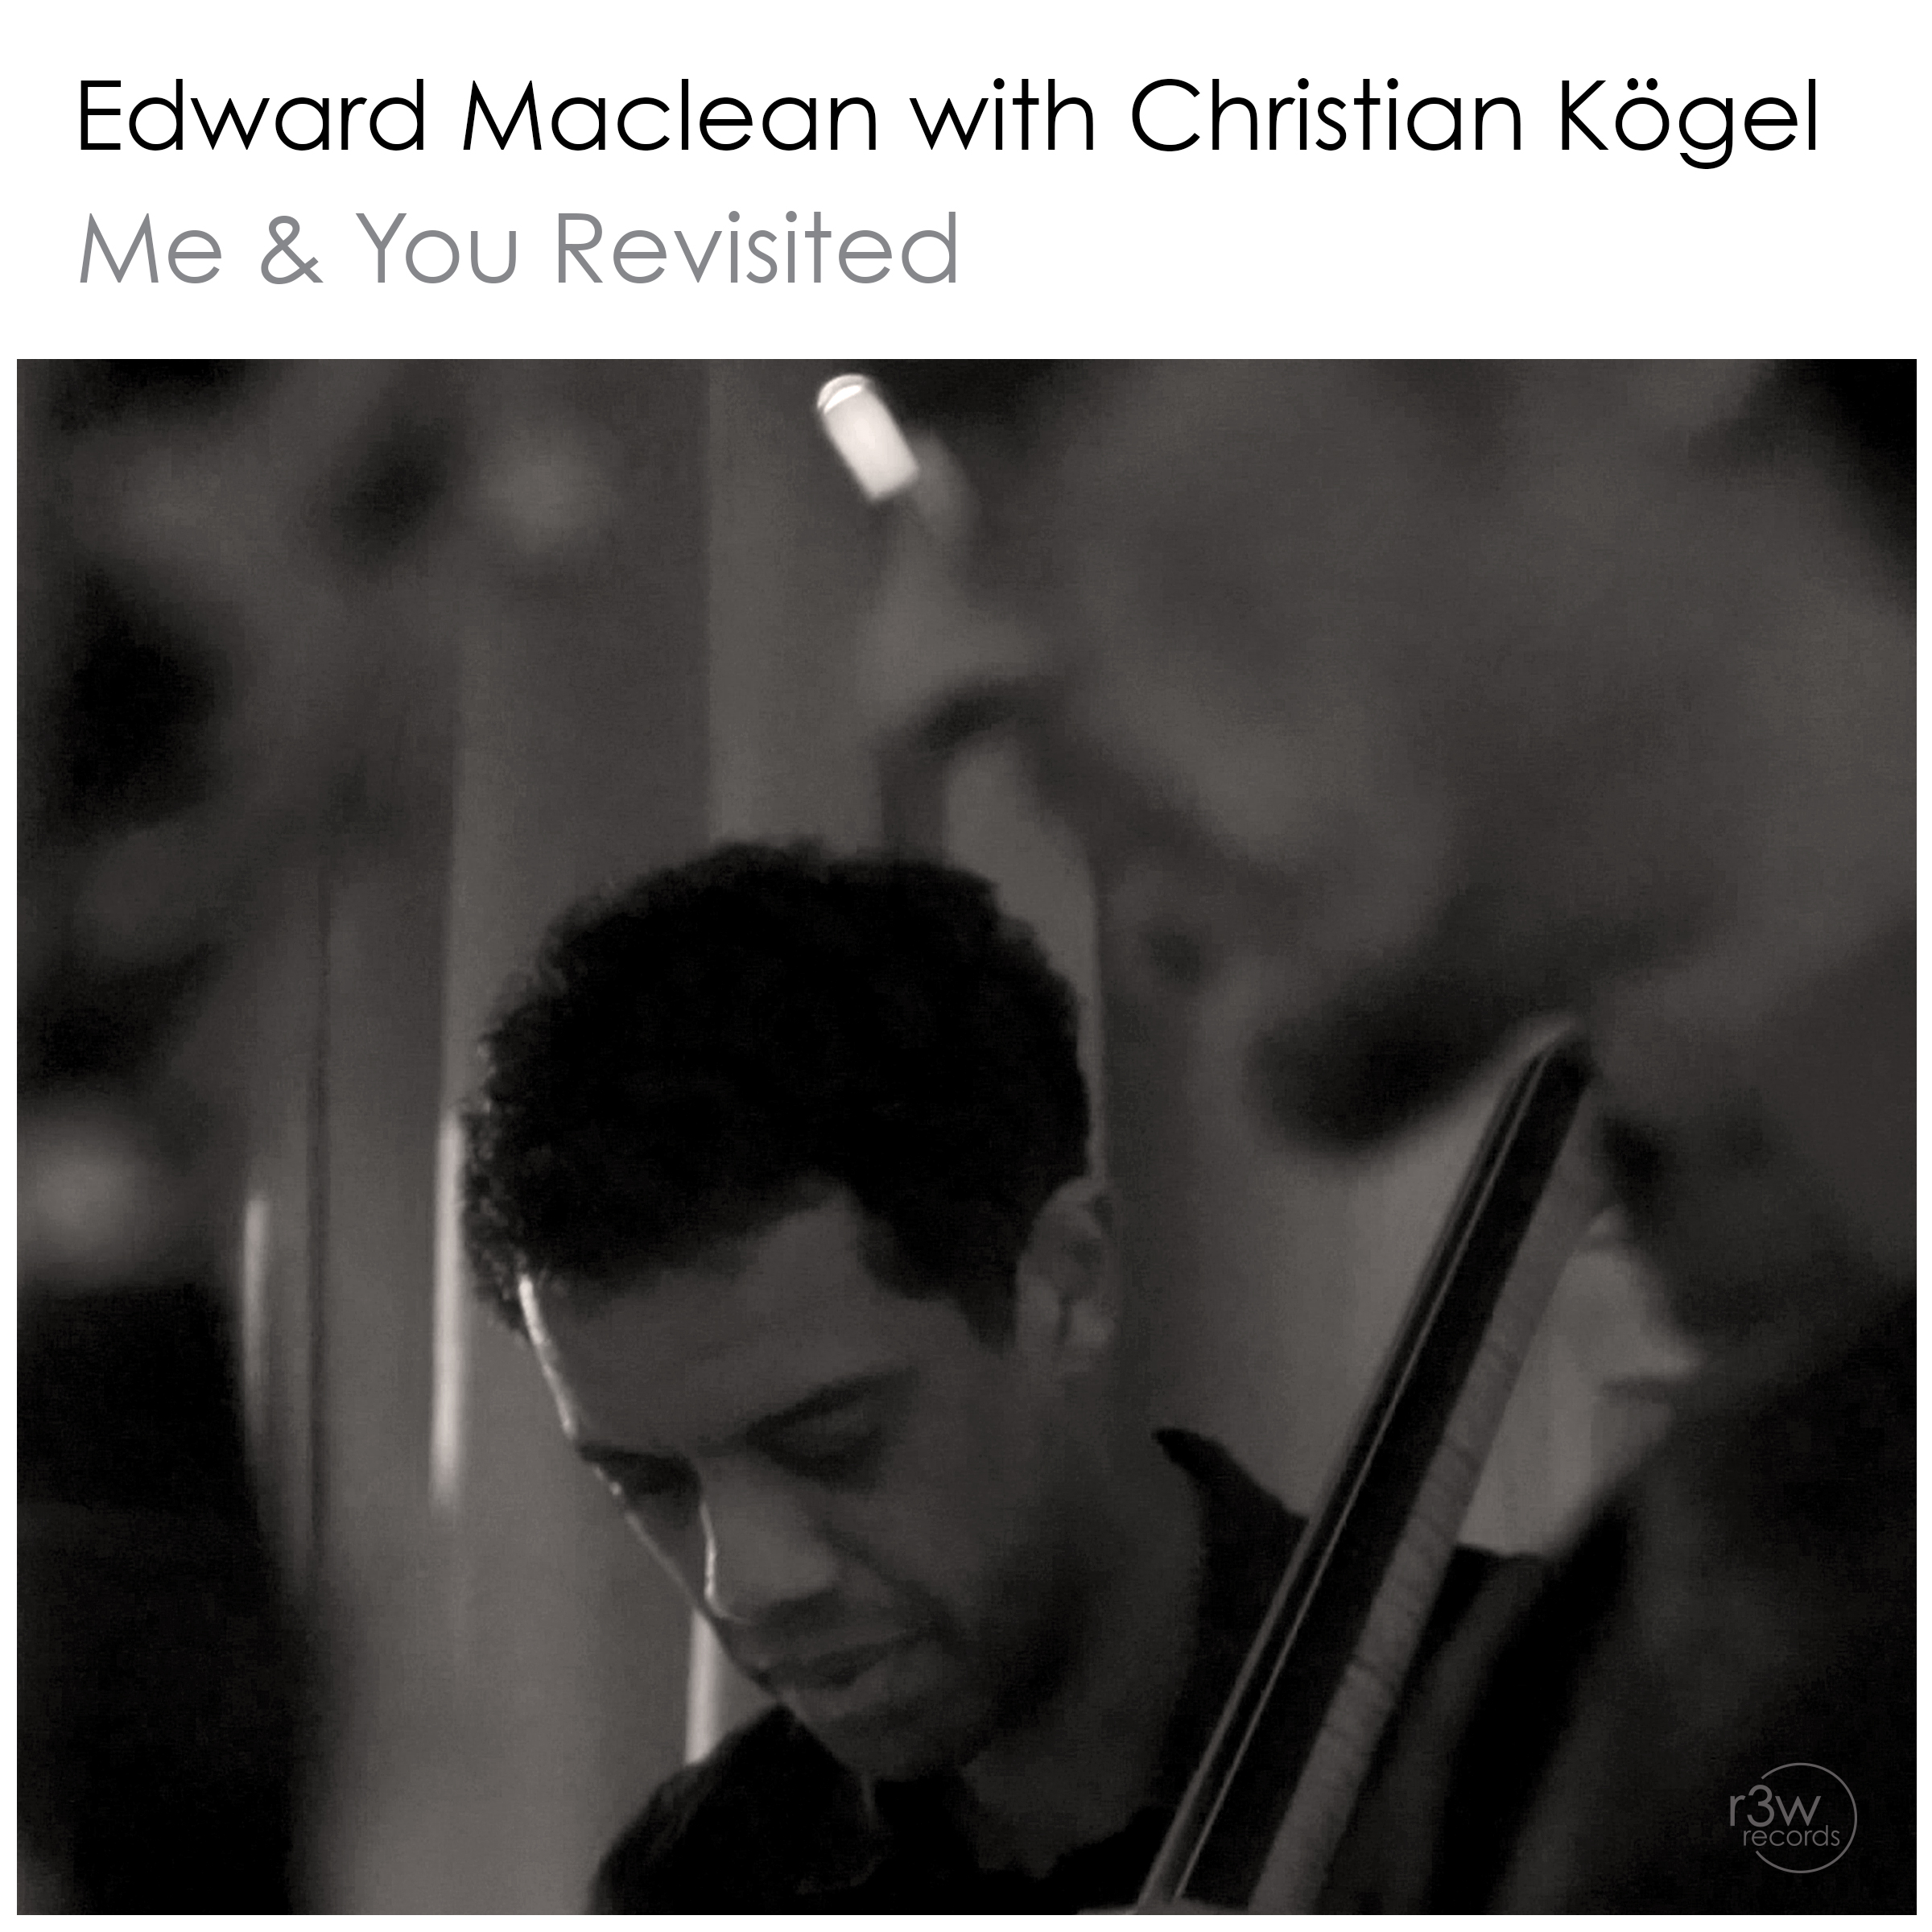 Cover_artwork_Me_and_You_Revisited_Edward_Maclean_with_Christian_Koegel